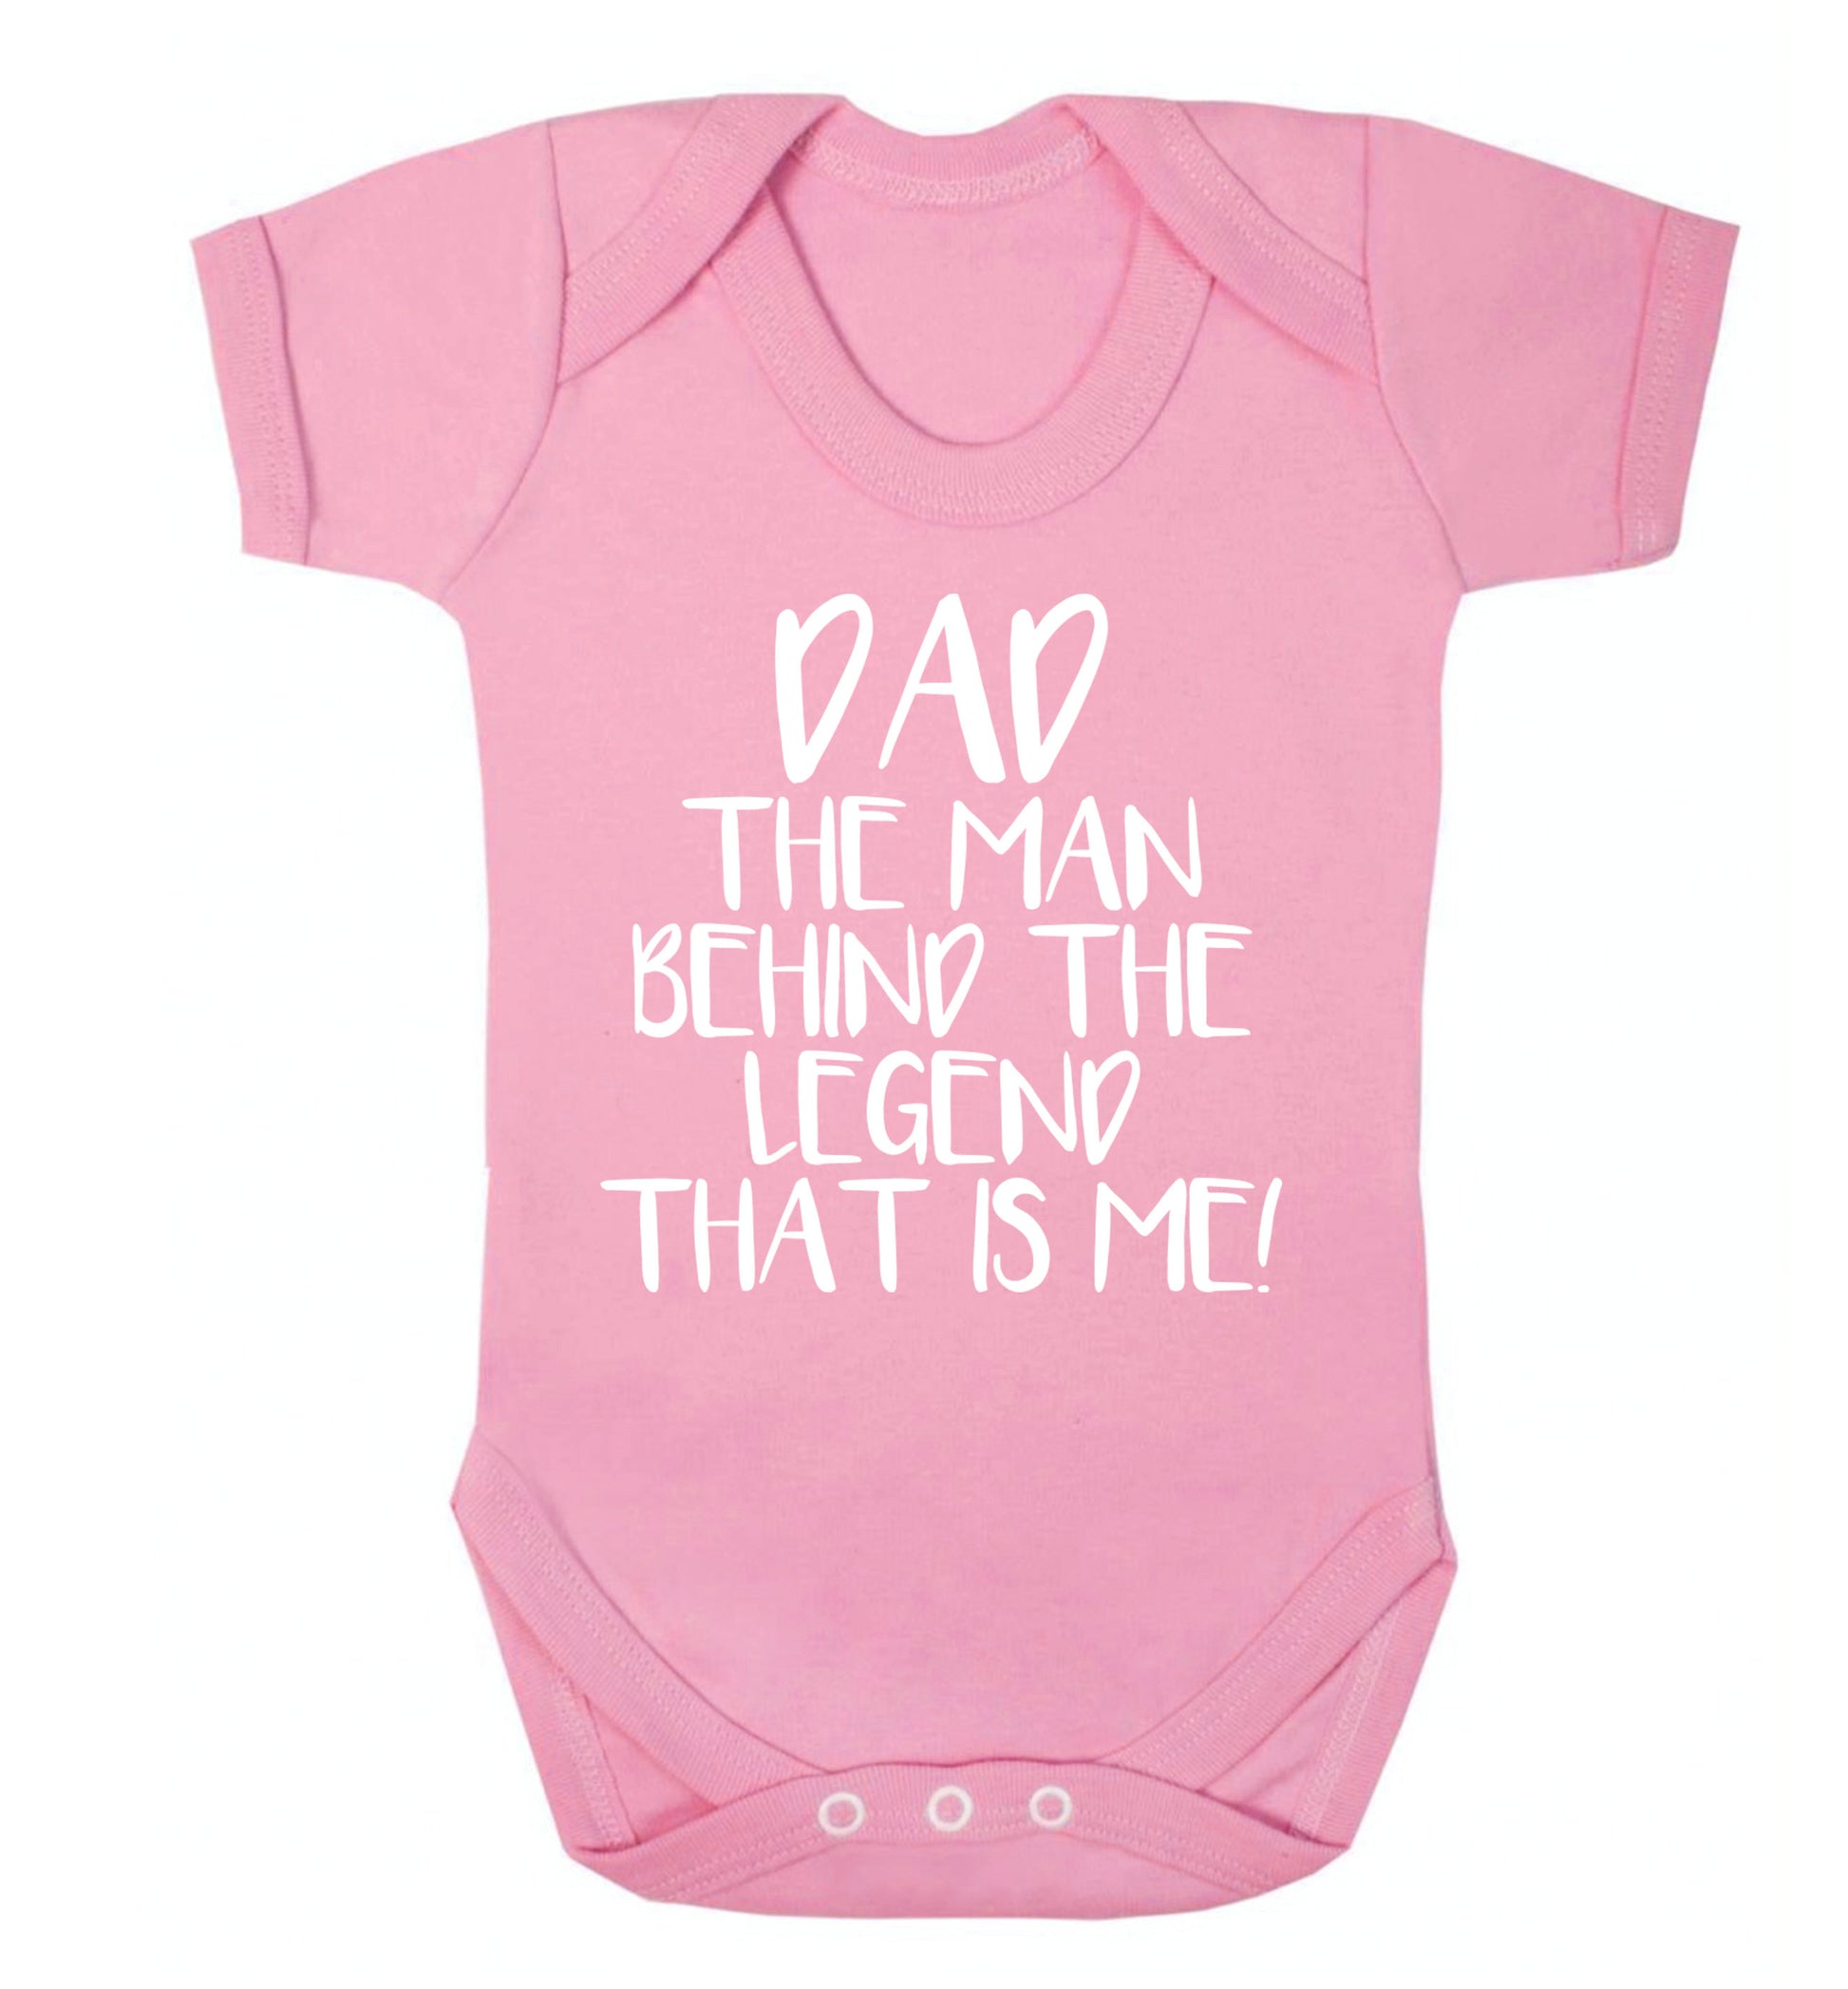 Dad the man behind the legend that is me! Baby Vest pale pink 18-24 months